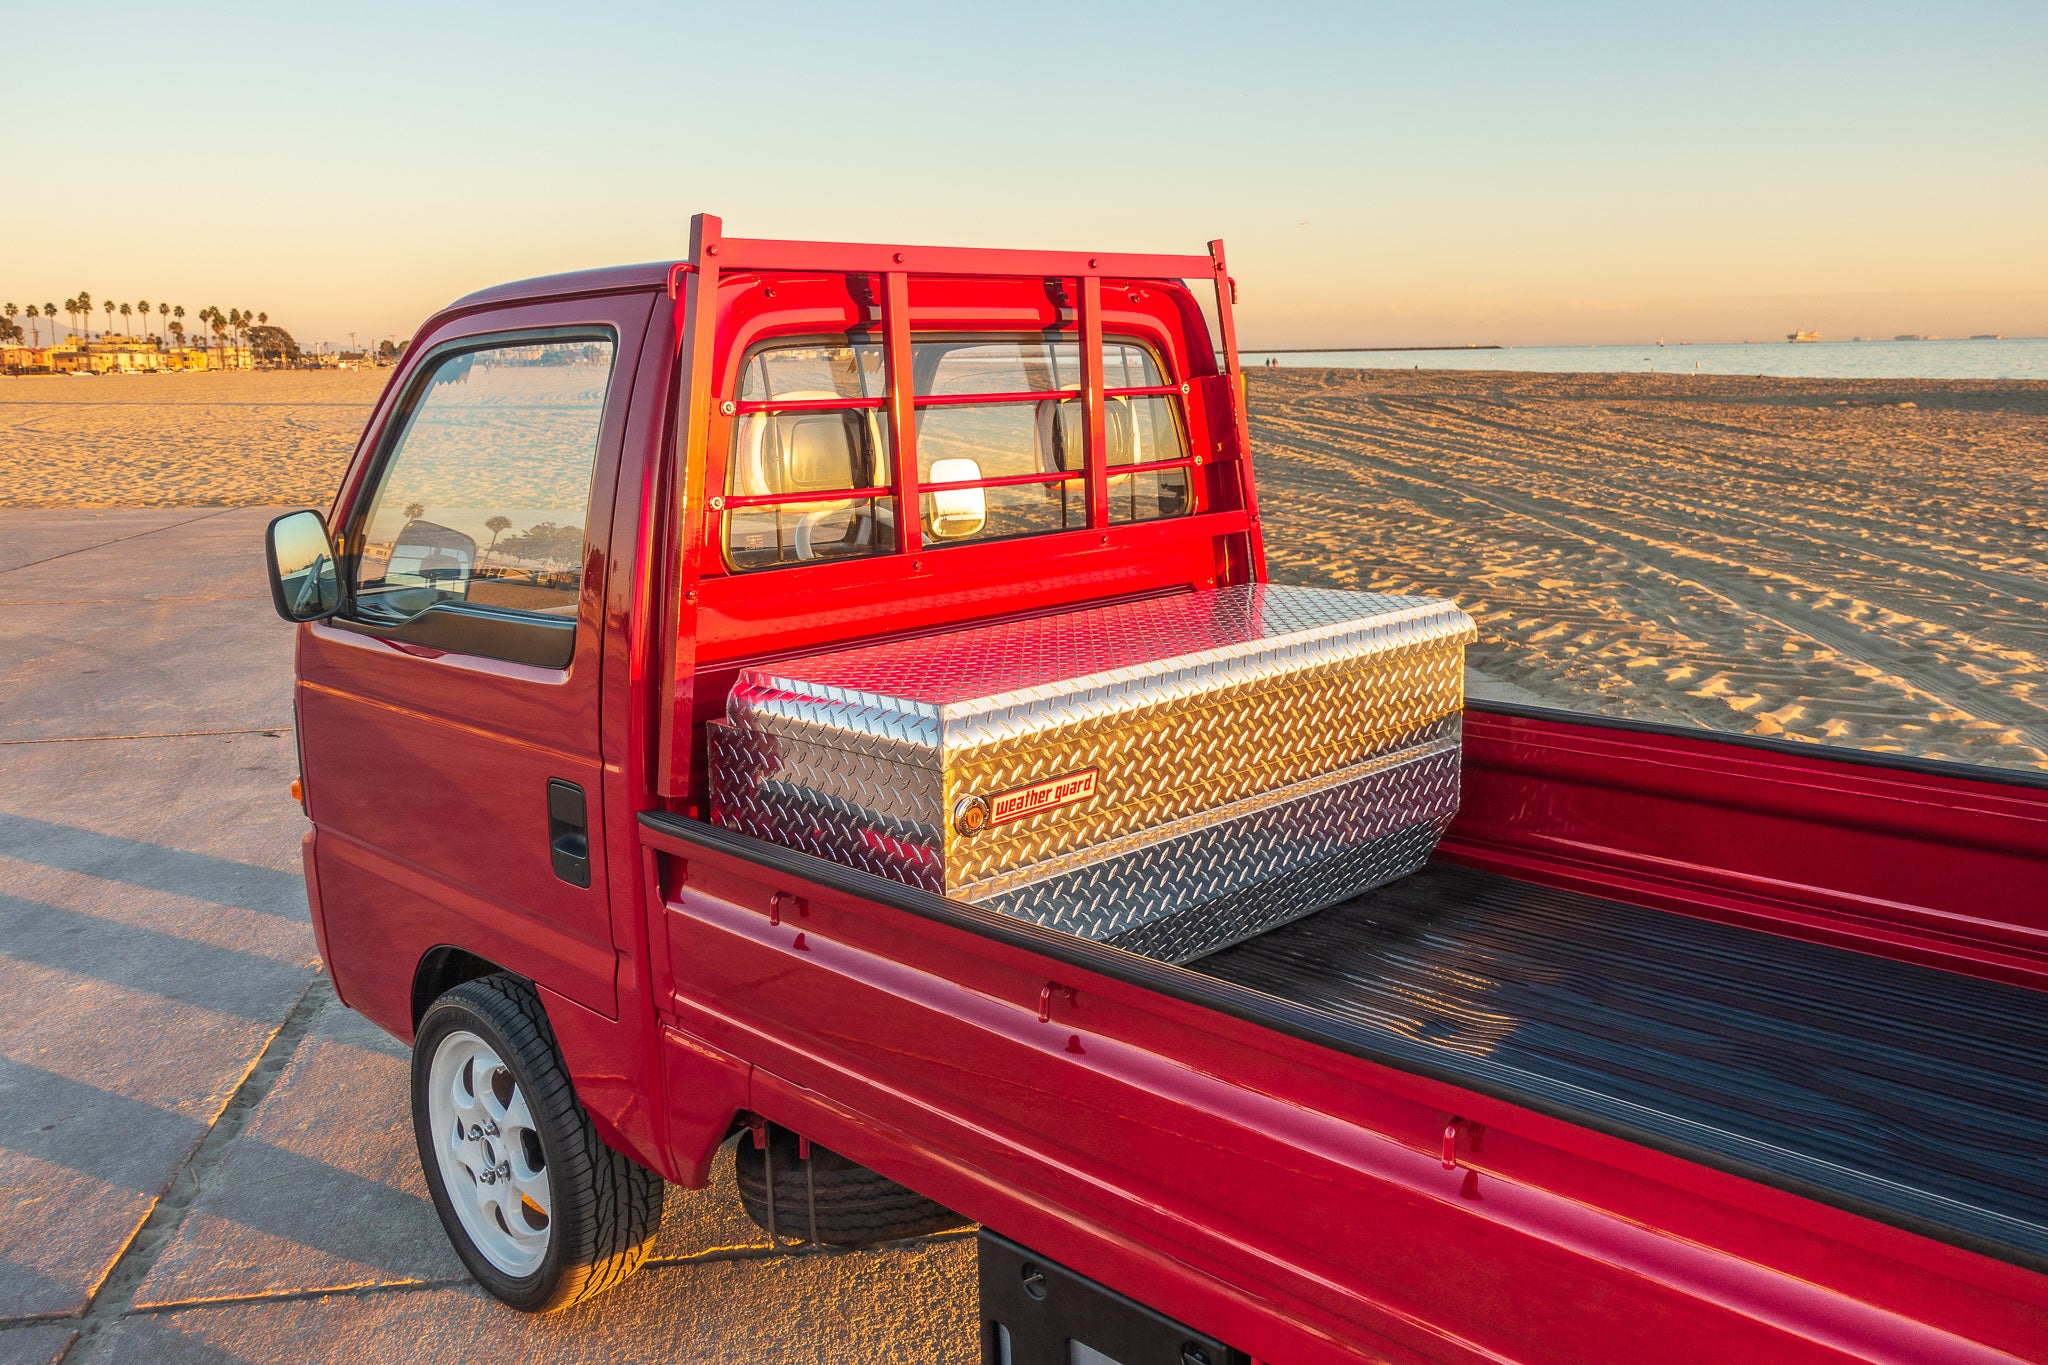 Red Kei truck parked on sandy beach at sunset, showcasing compact design and utility features including a metal toolbox in the bed, ideal for highlighting its versatility and appeal in scenic outdoor settings.